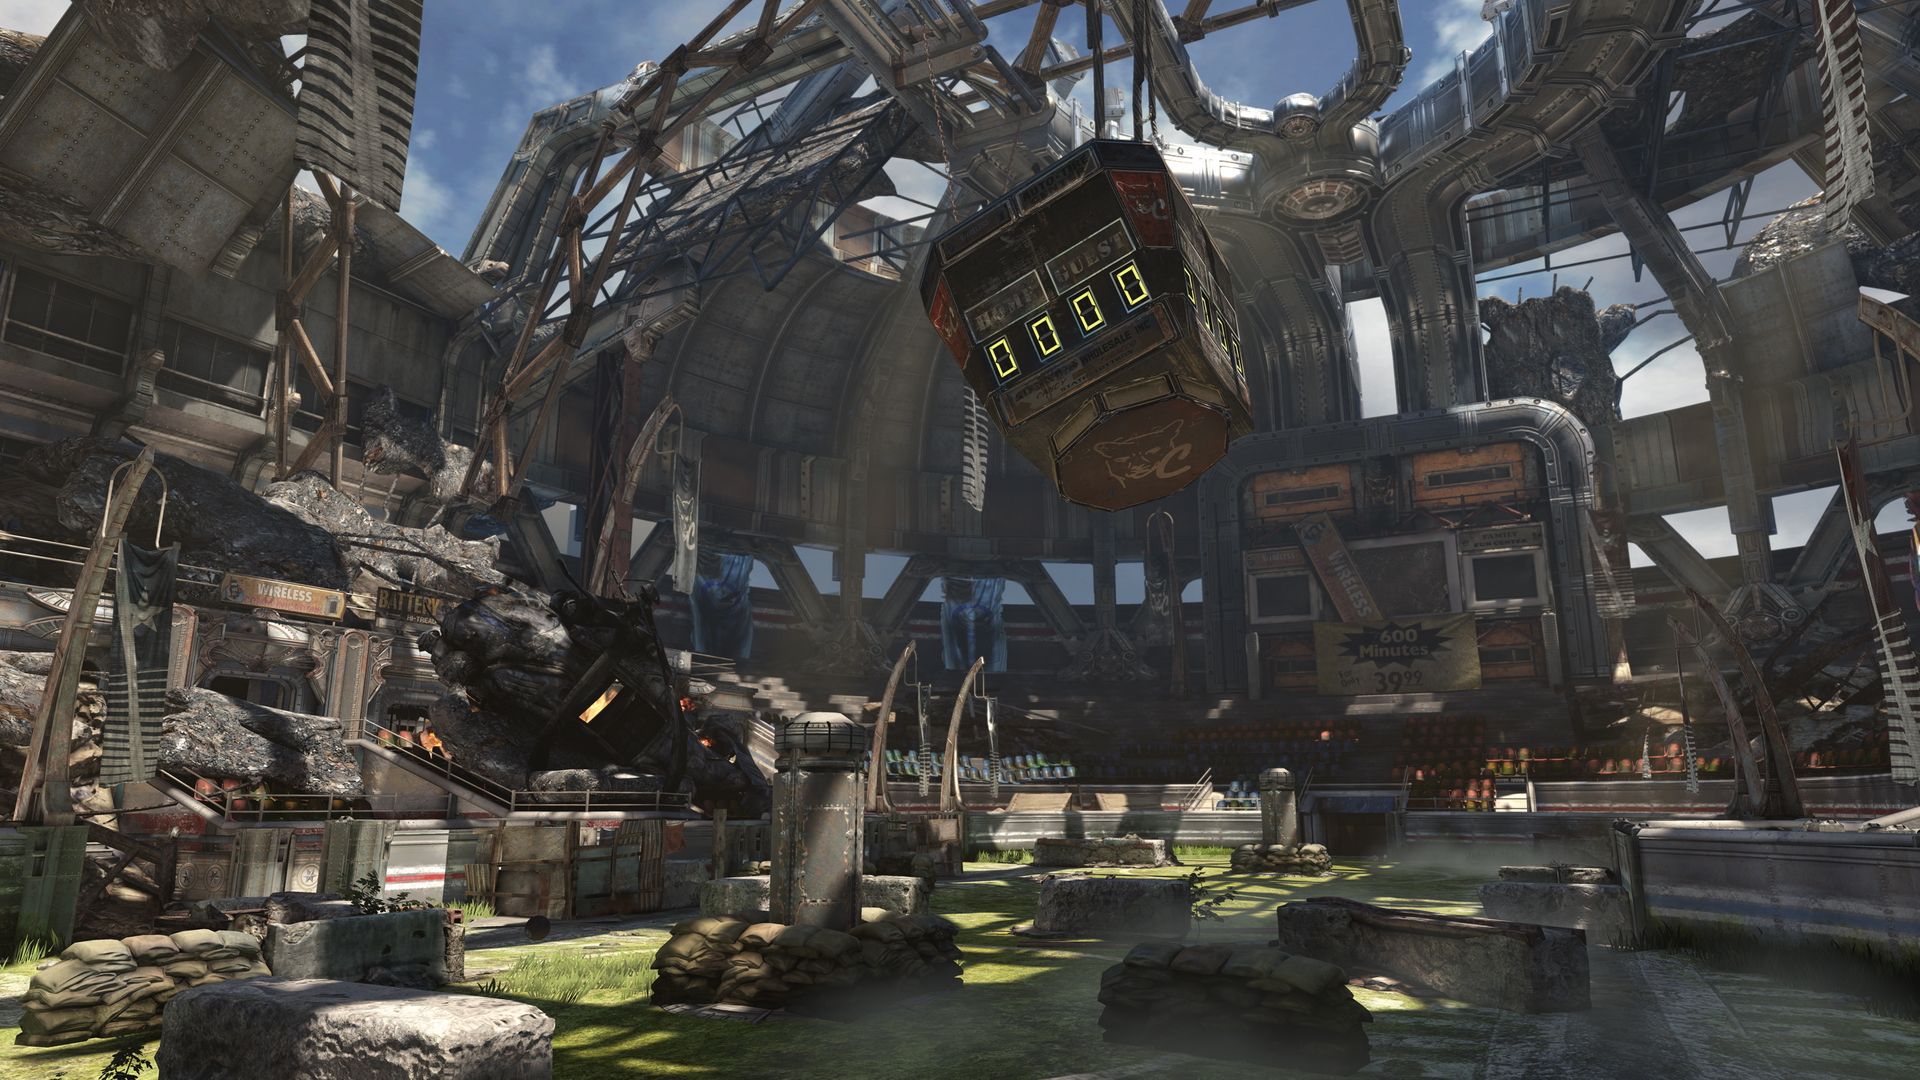 Gears of War 3 Multiplayer Beta Available Today for Bullestorm Owners